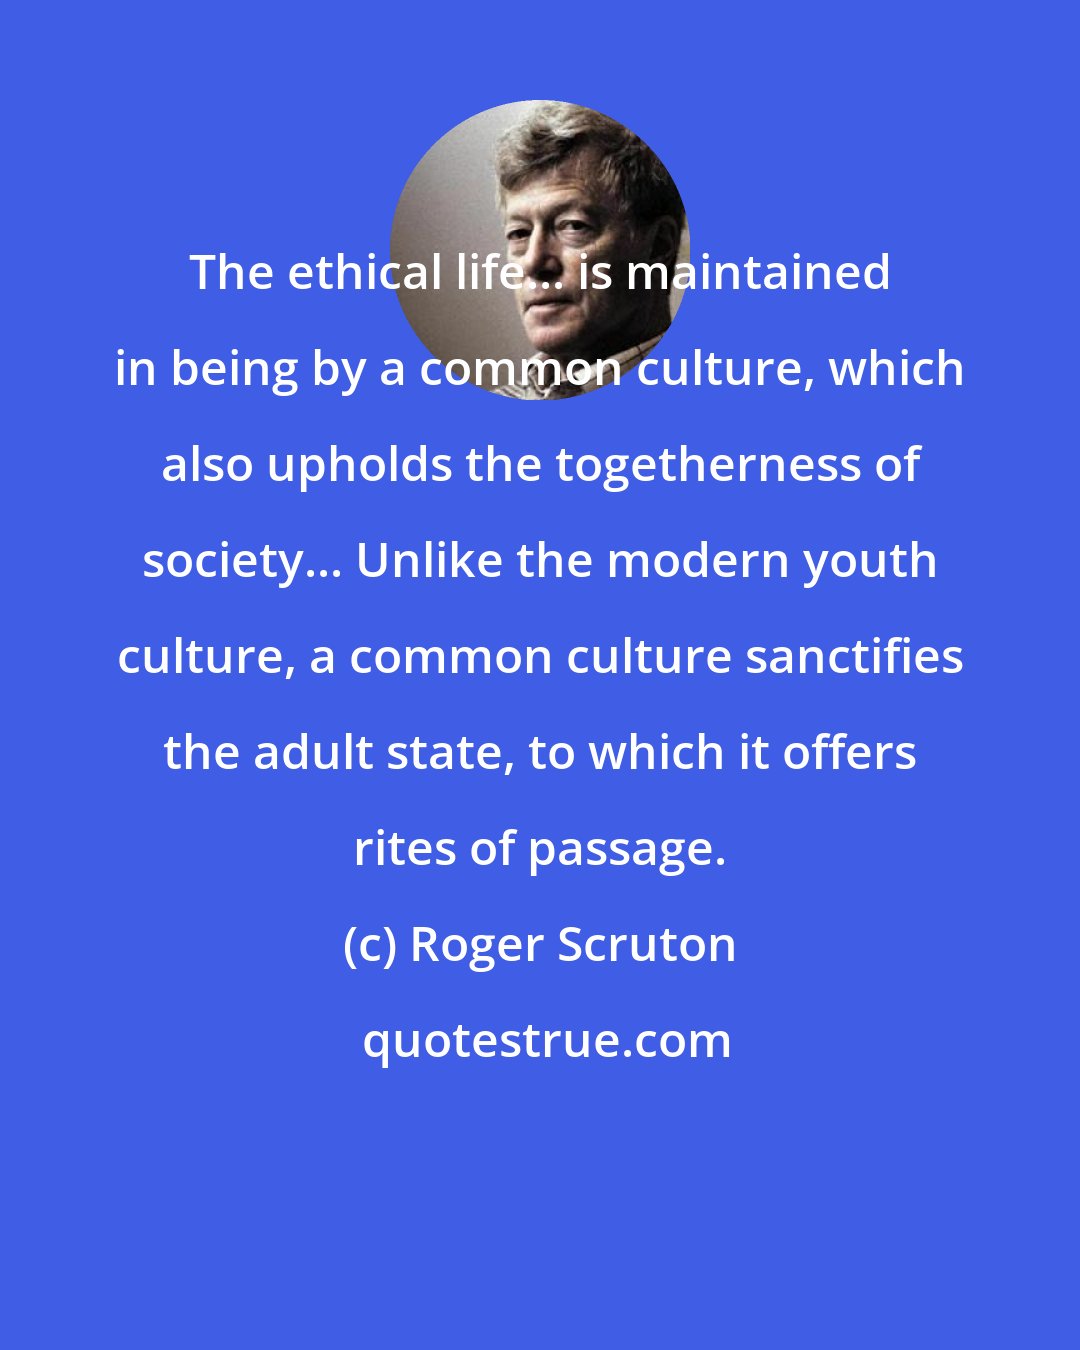 Roger Scruton: The ethical life... is maintained in being by a common culture, which also upholds the togetherness of society... Unlike the modern youth culture, a common culture sanctifies the adult state, to which it offers rites of passage.